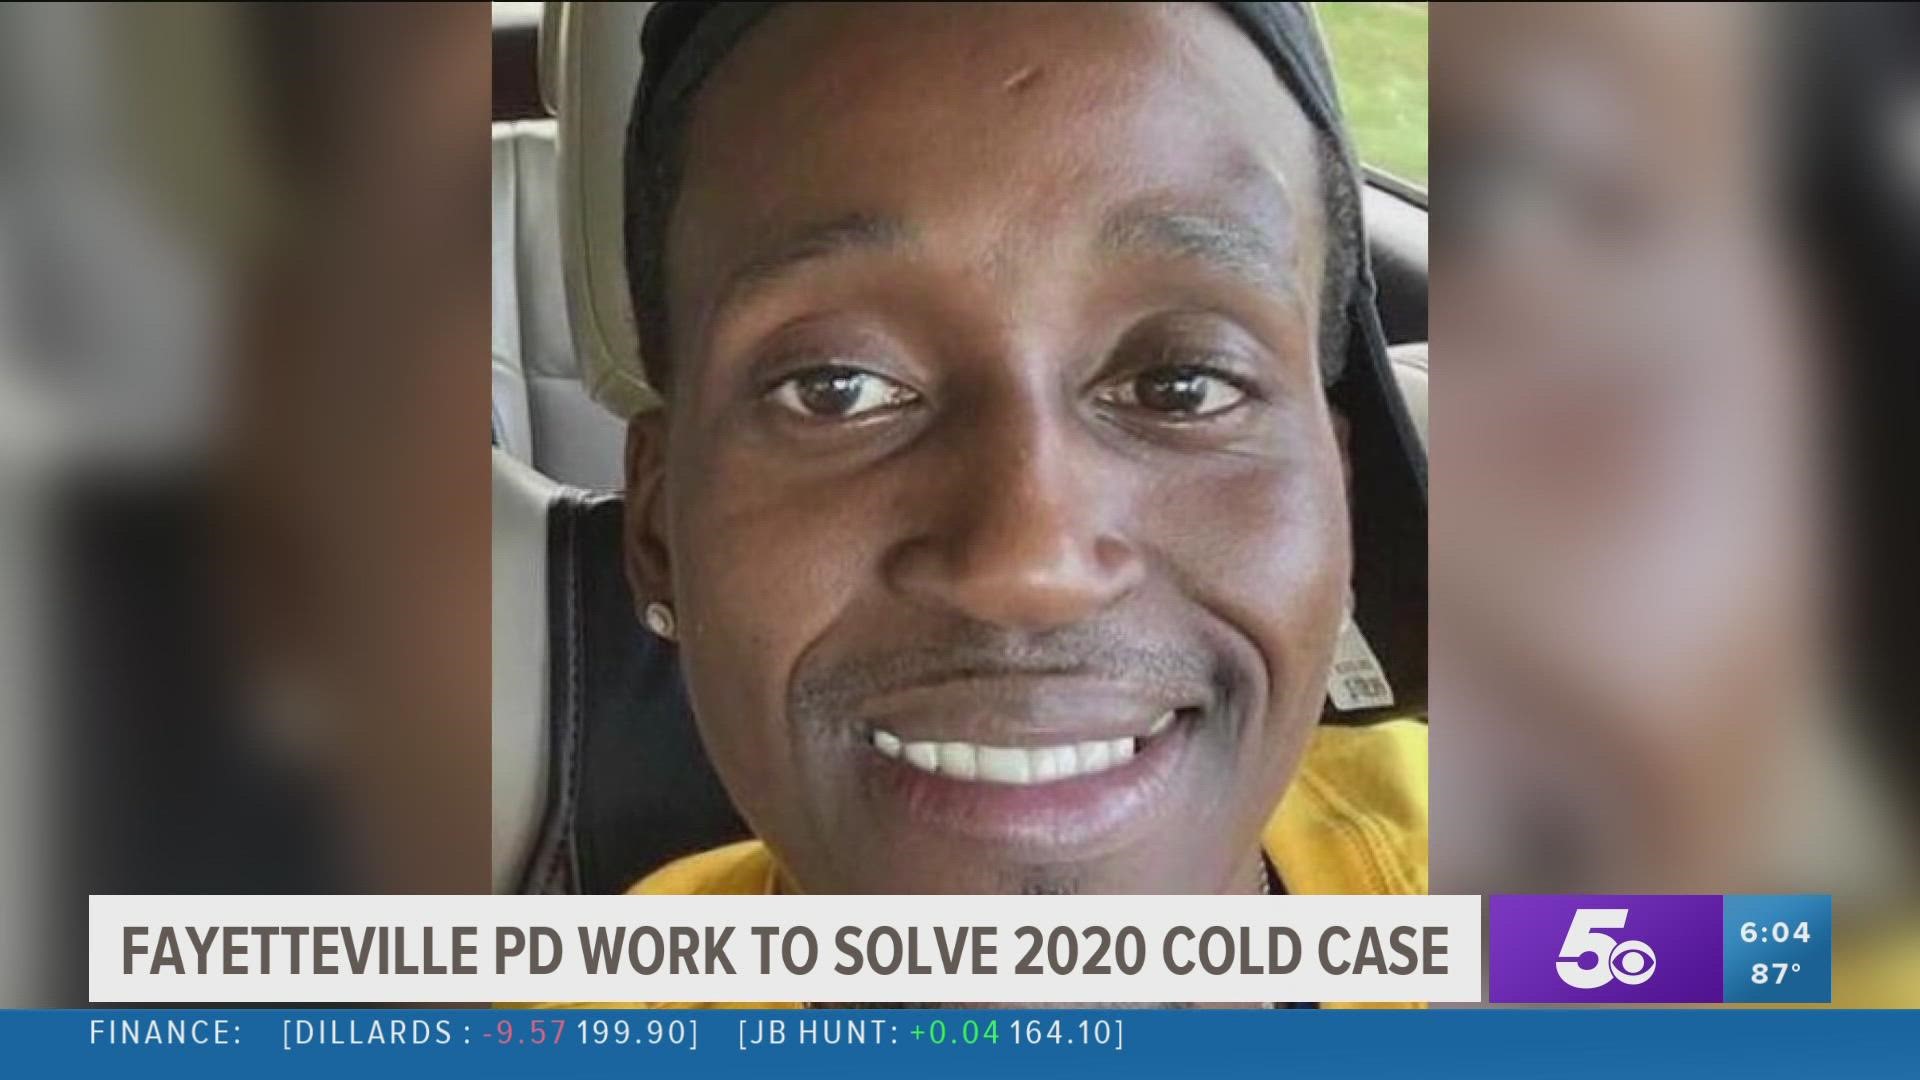 In December 2020, Fayetteville police found Cameron Johnson dead in his car after he was shot multiple times.